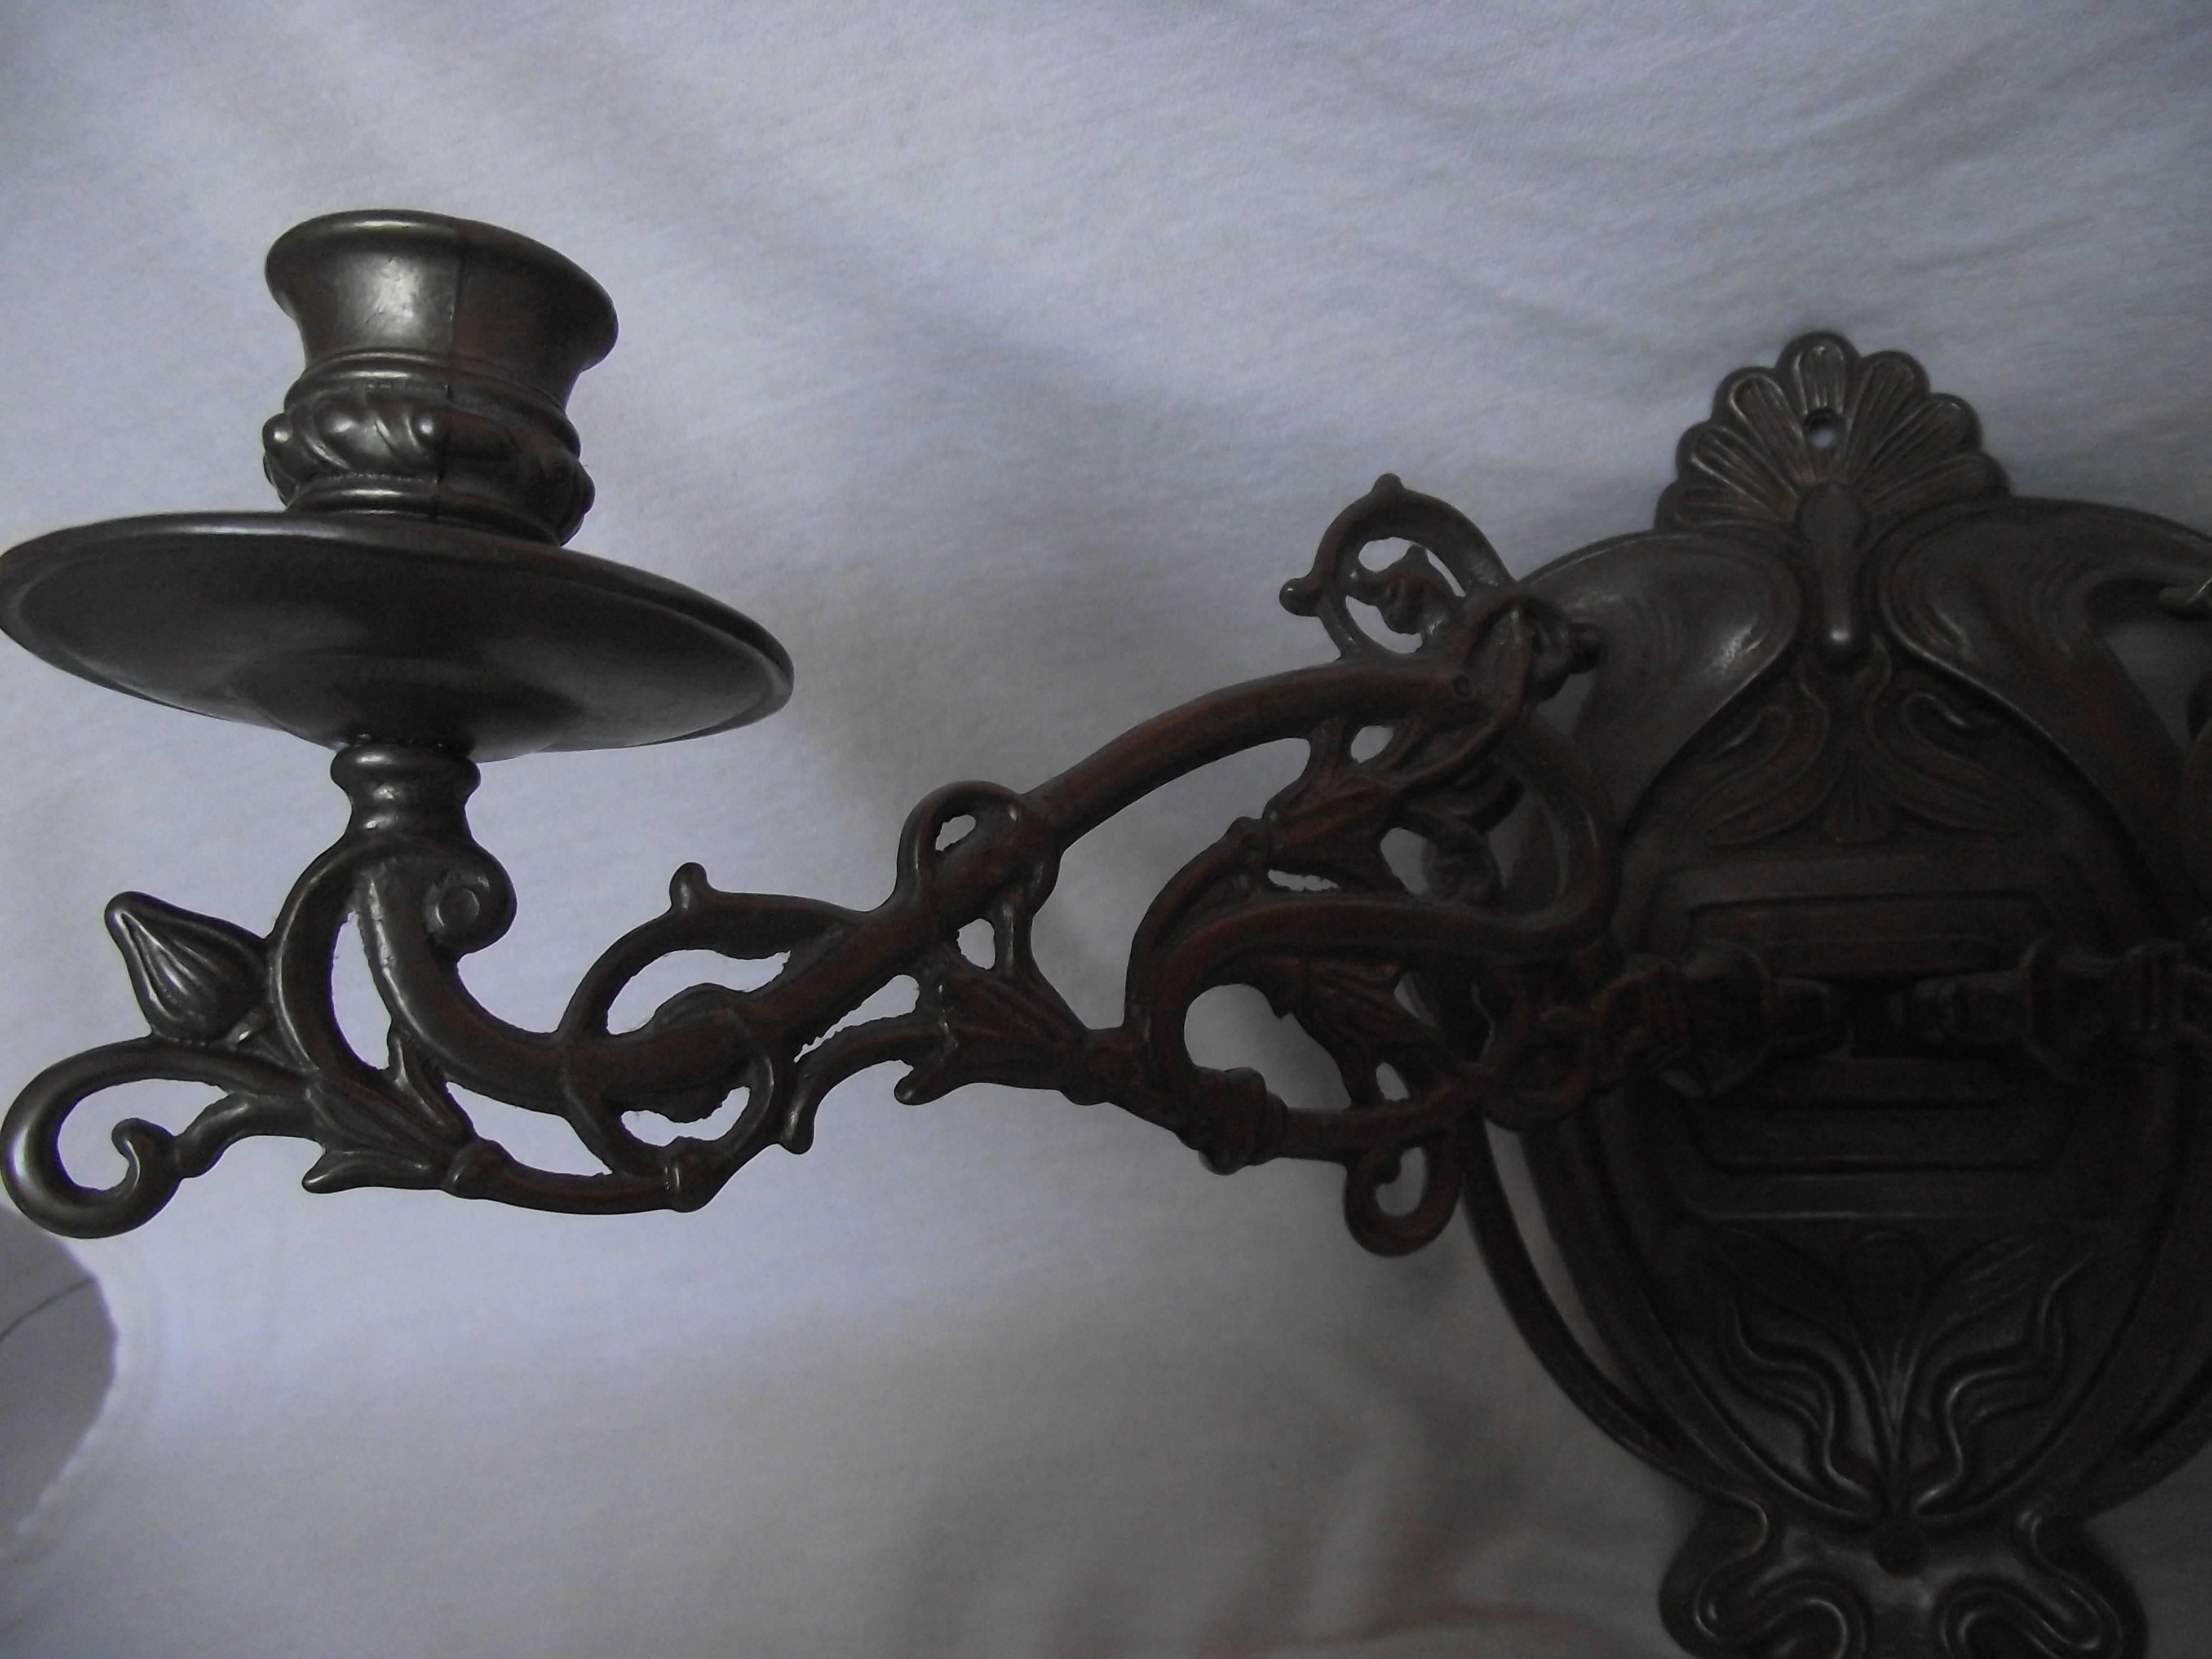 Nice pair of Art Nouveau swing arm candle sconces in bronze finish.